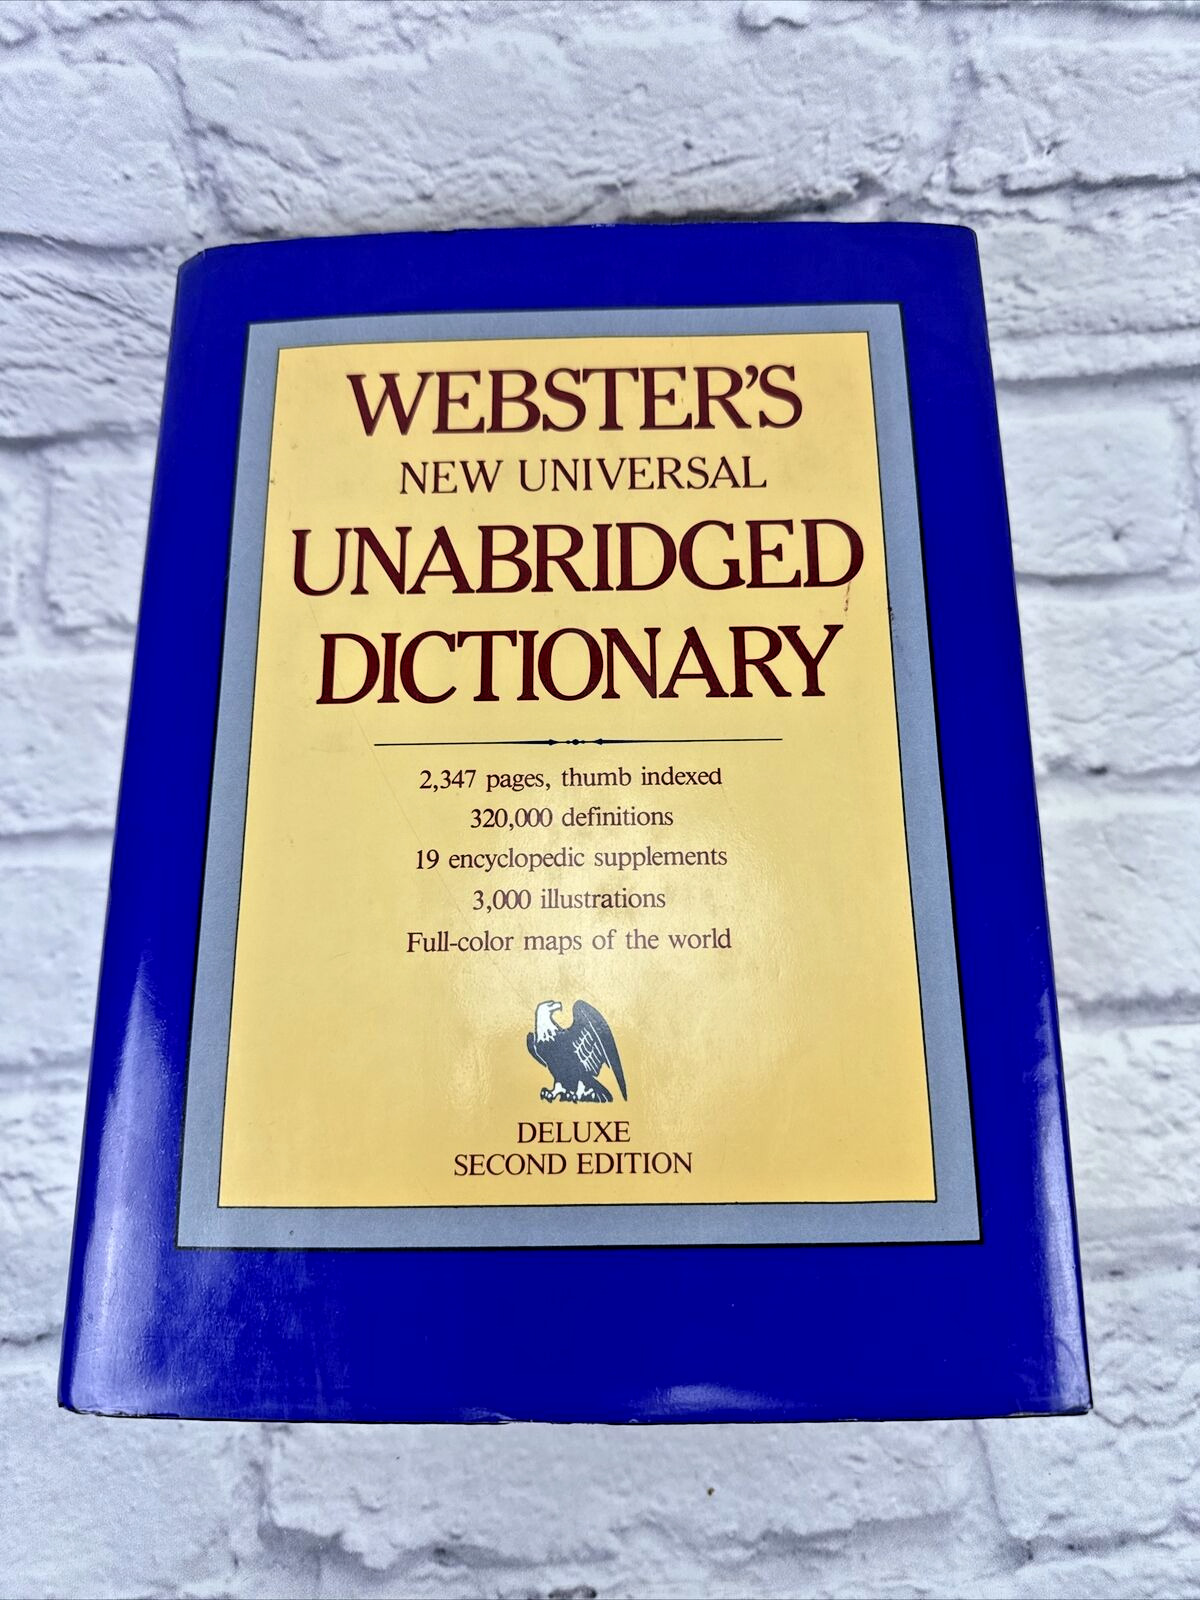 Vintage 1983 Webster\'s New Universal Unabridged Deluxe Second Edition Dictionary